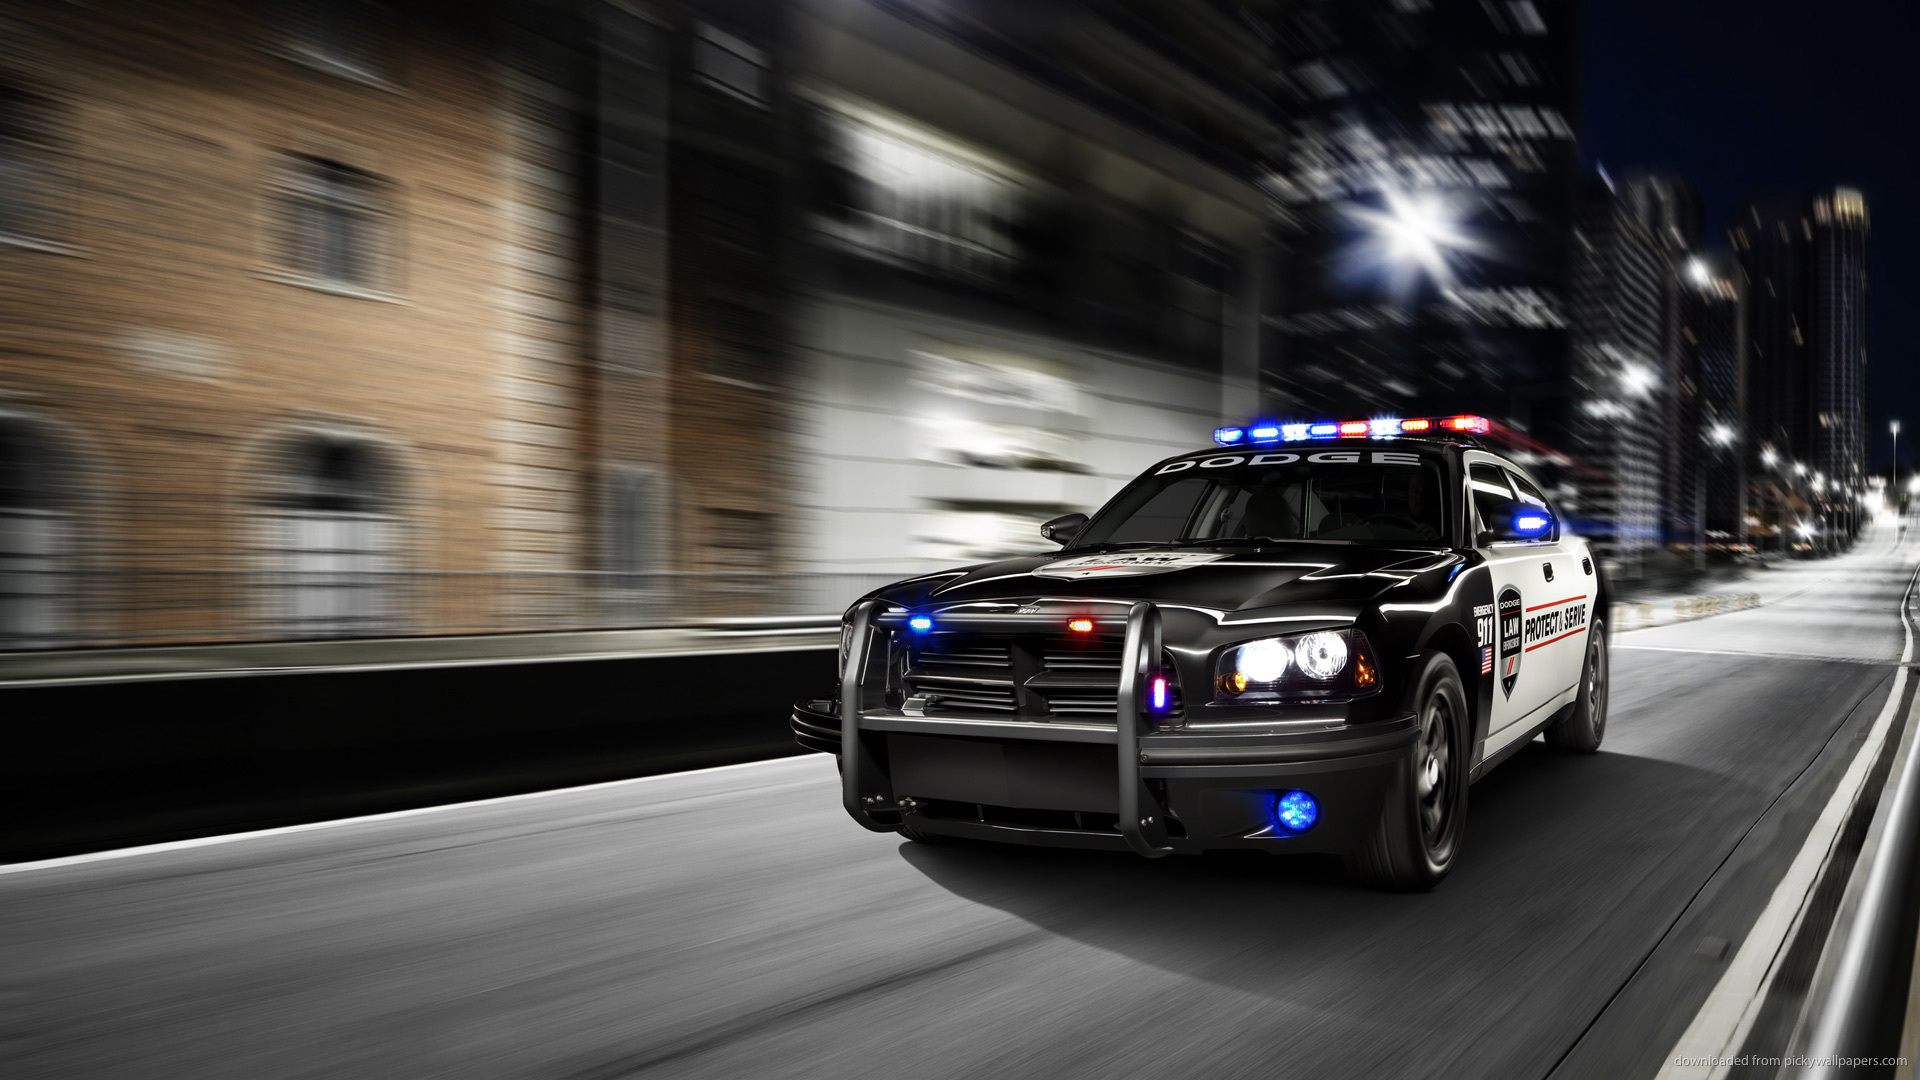 Dodge Police Charger Wallpaper Cars